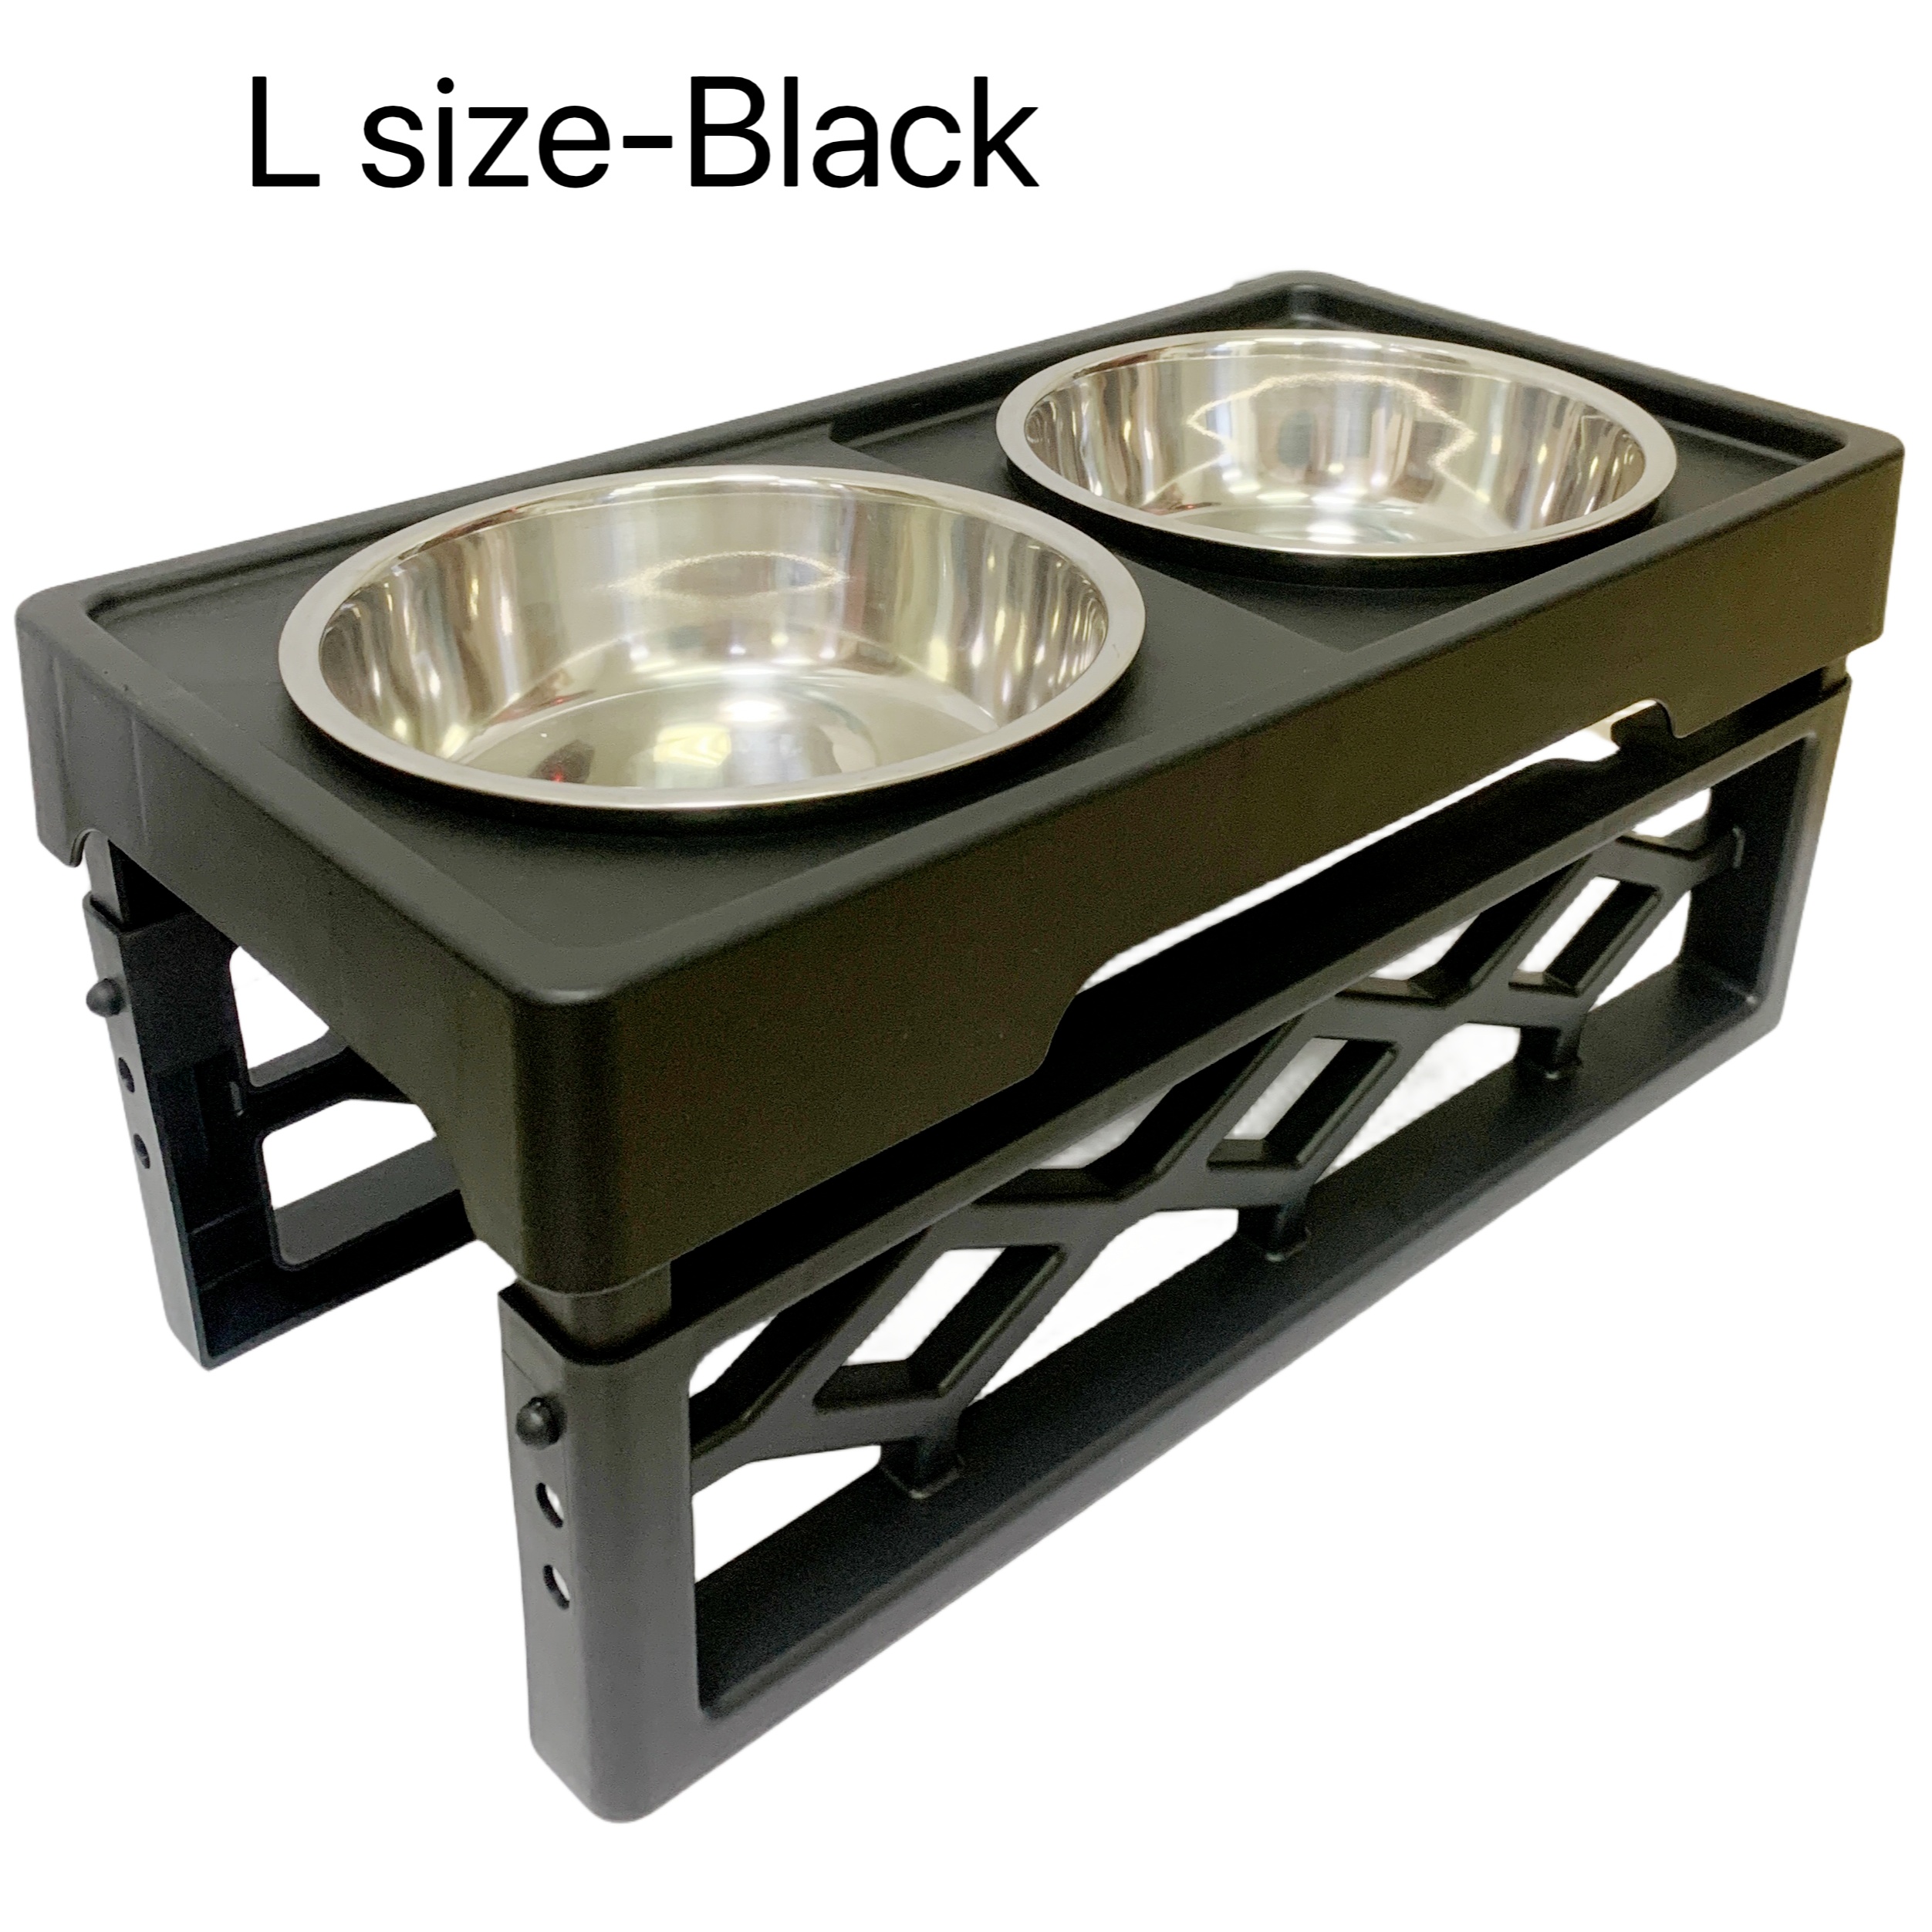 Elevated Dog Bowls With 2 Stainless Steel Dog Food Bowls - Temu